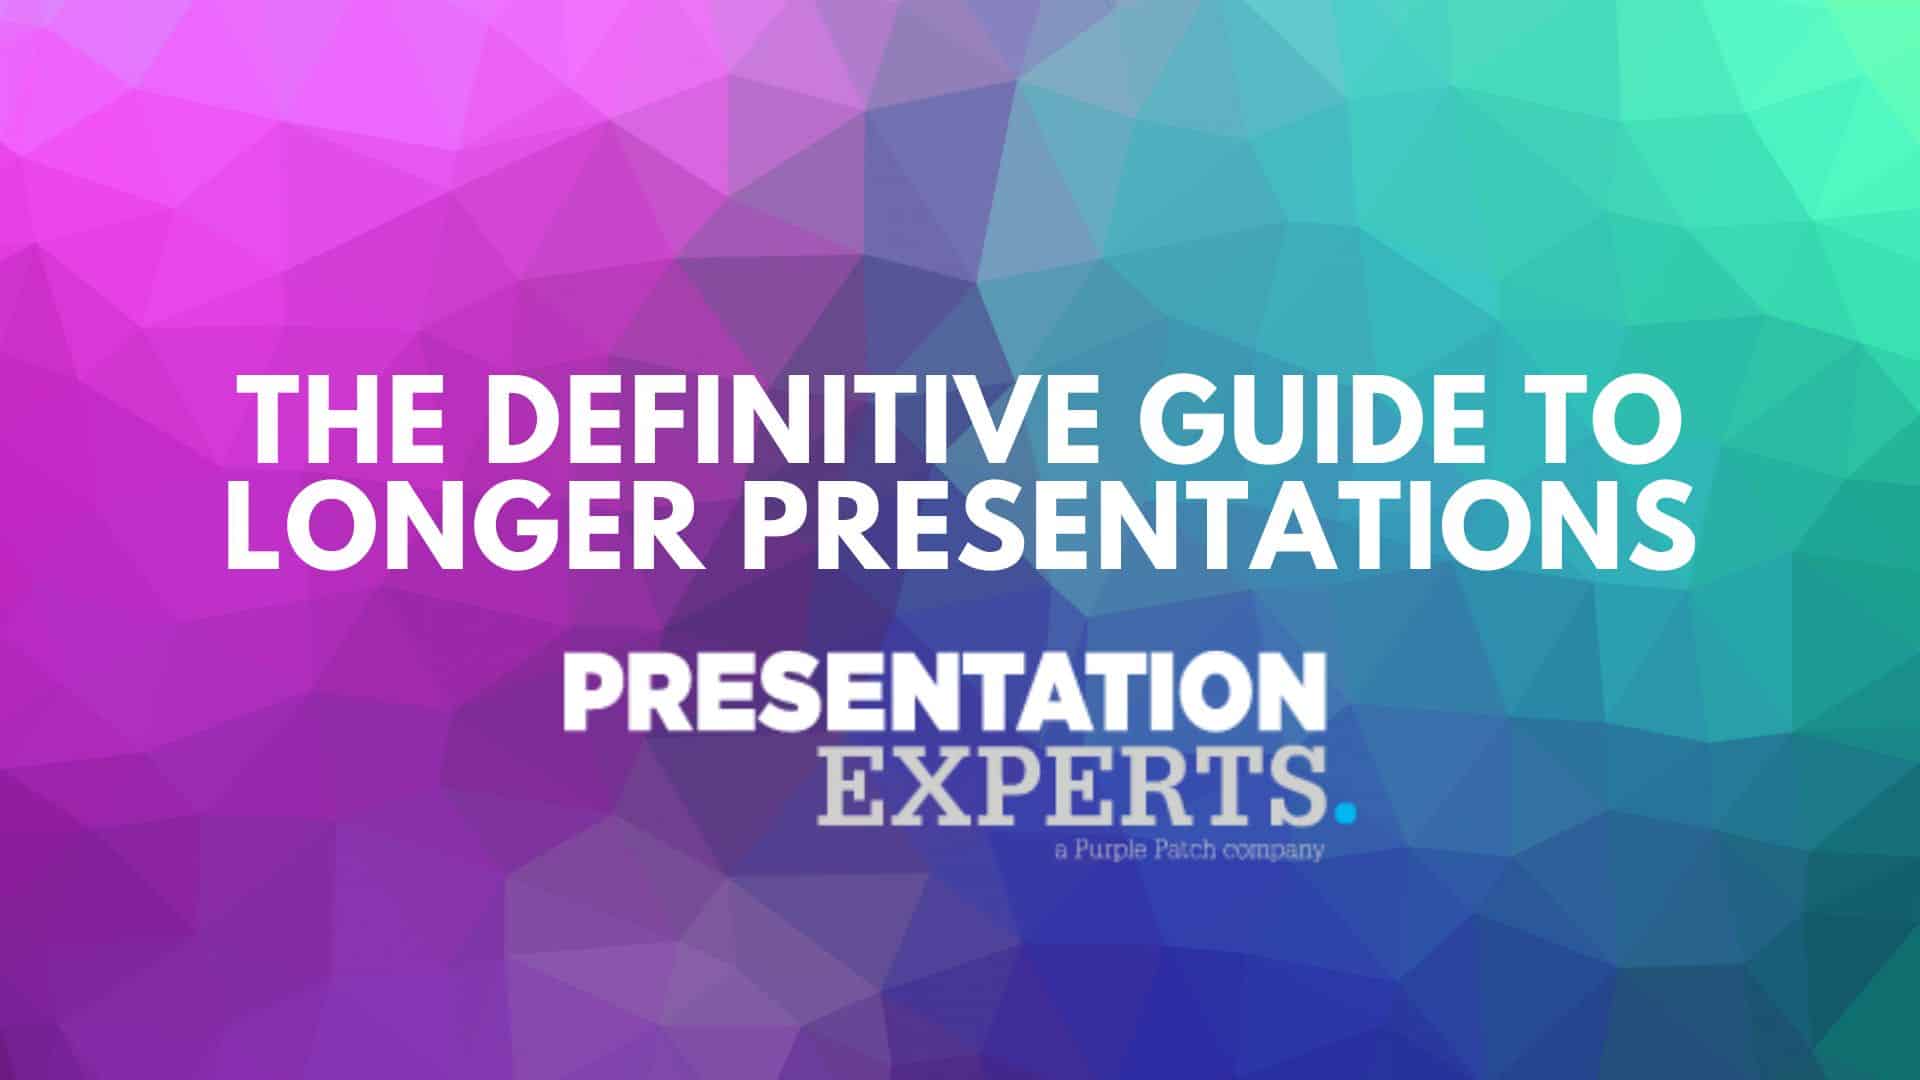 how to make your presentation longer